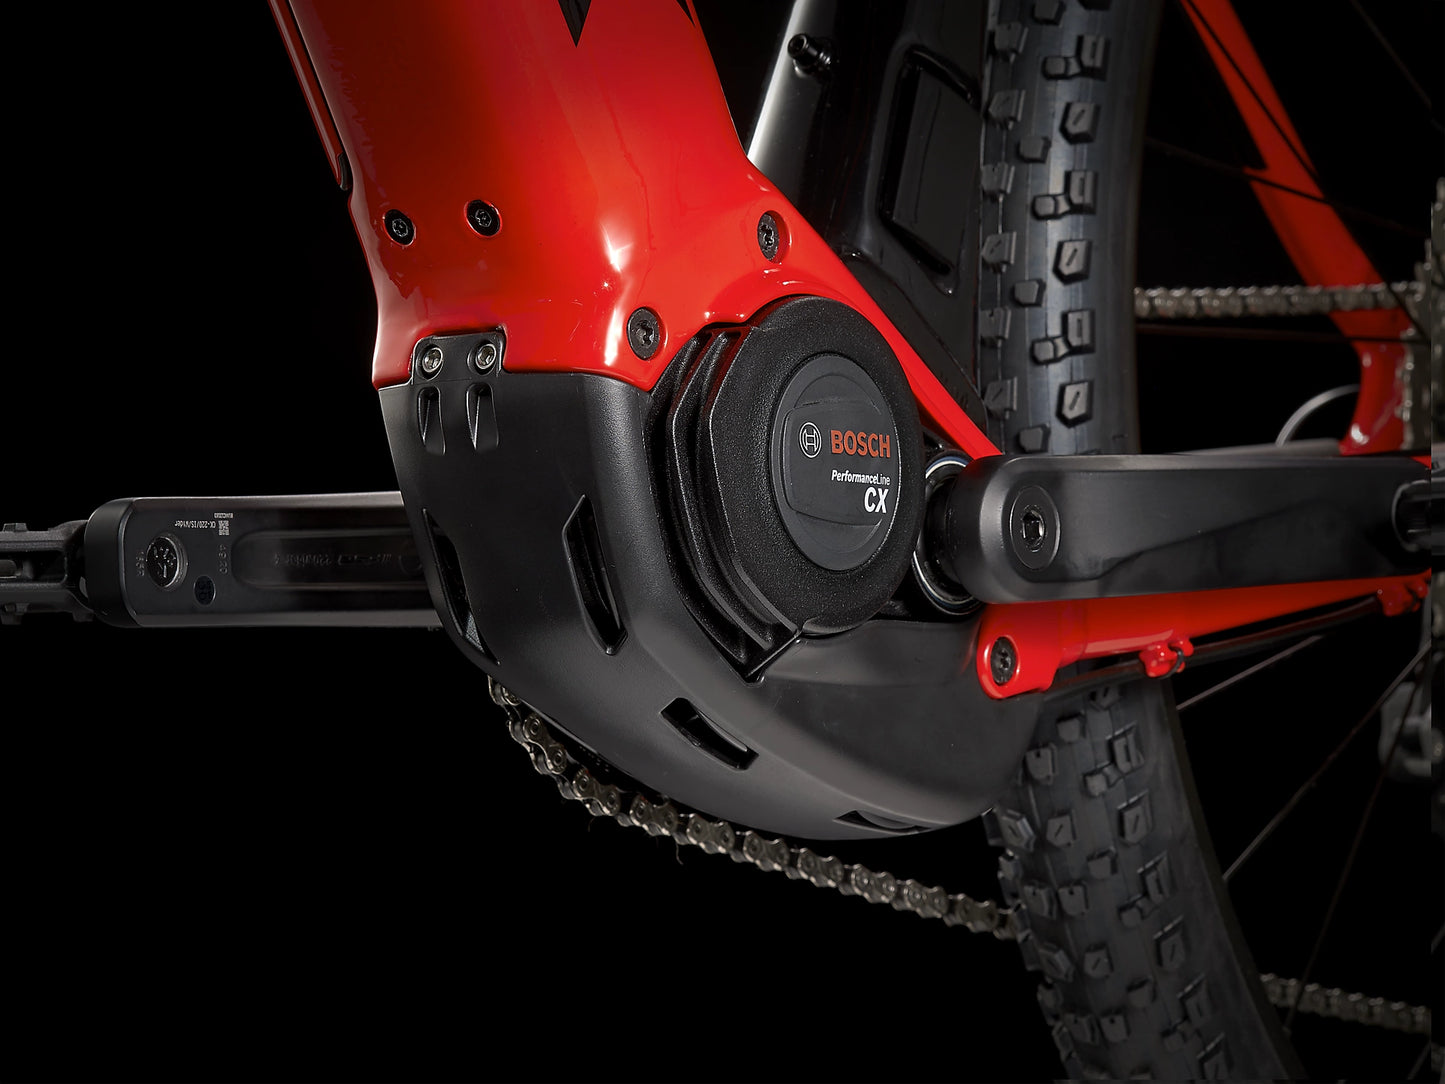 Trek Powerfly 4 Red/Black **in store pick-up only**